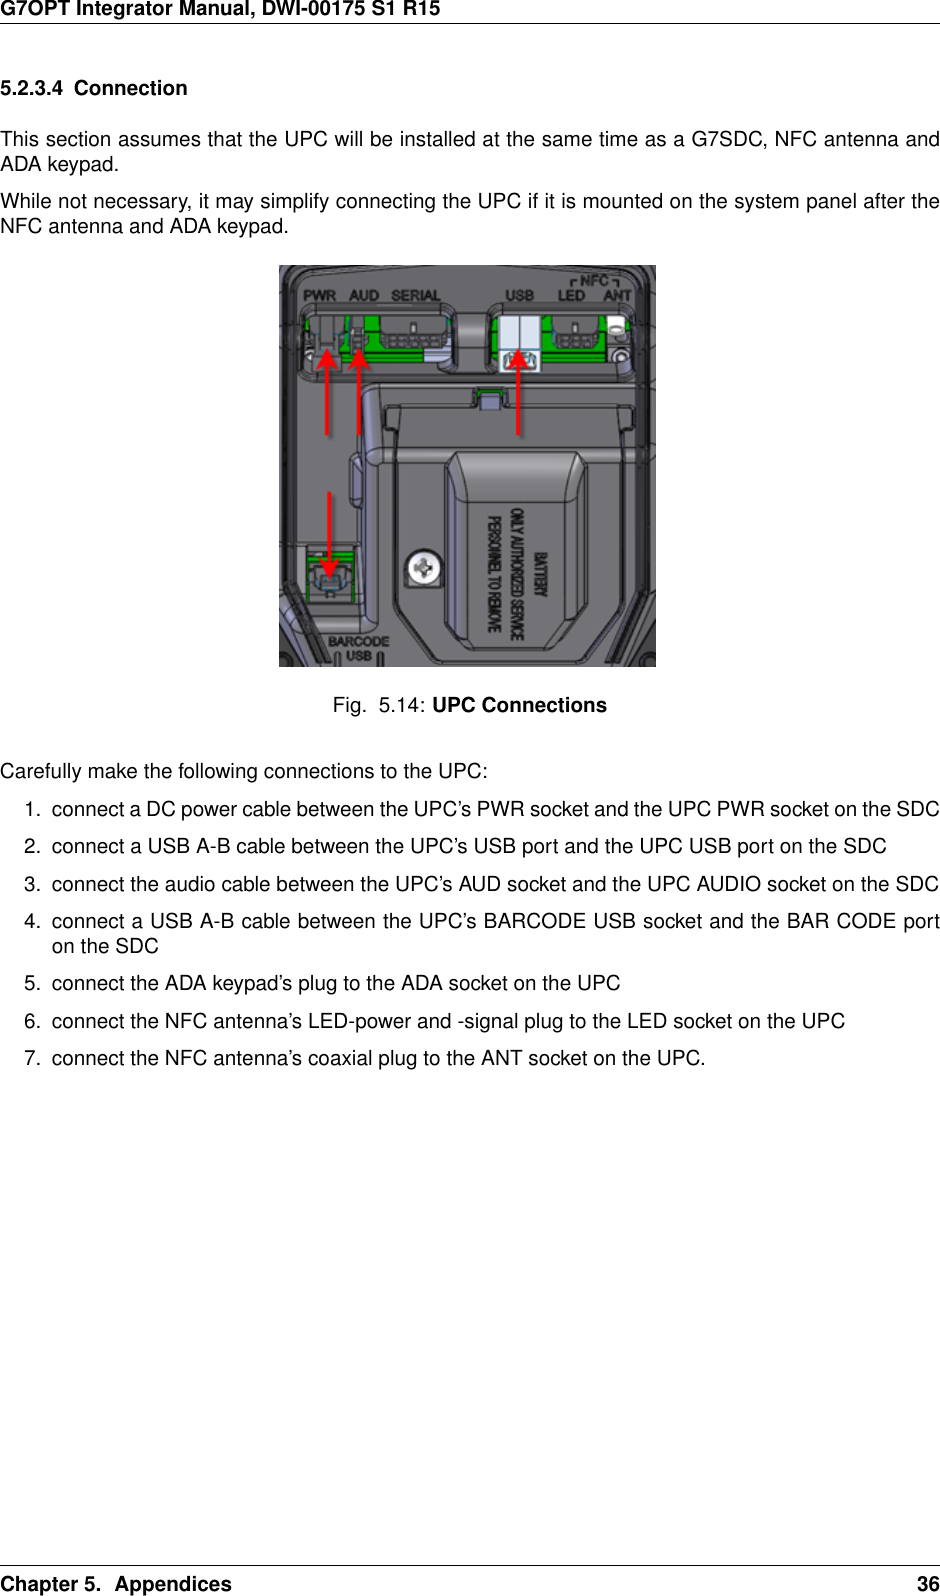 G7OPT Integrator Manual, DWI-00175 S1 R155.2.3.4 ConnectionThis section assumes that the UPC will be installed at the same time as a G7SDC, NFC antenna andADA keypad.While not necessary, it may simplify connecting the UPC if it is mounted on the system panel after theNFC antenna and ADA keypad.Fig. 5.14: UPC ConnectionsCarefully make the following connections to the UPC:1. connect a DC power cable between the UPC’s PWR socket and the UPC PWR socket on the SDC2. connect a USB A-B cable between the UPC’s USB port and the UPC USB port on the SDC3. connect the audio cable between the UPC’s AUD socket and the UPC AUDIO socket on the SDC4. connect a USB A-B cable between the UPC’s BARCODE USB socket and the BAR CODE porton the SDC5. connect the ADA keypad’s plug to the ADA socket on the UPC6. connect the NFC antenna’s LED-power and -signal plug to the LED socket on the UPC7. connect the NFC antenna’s coaxial plug to the ANT socket on the UPC.Chapter 5. Appendices 36